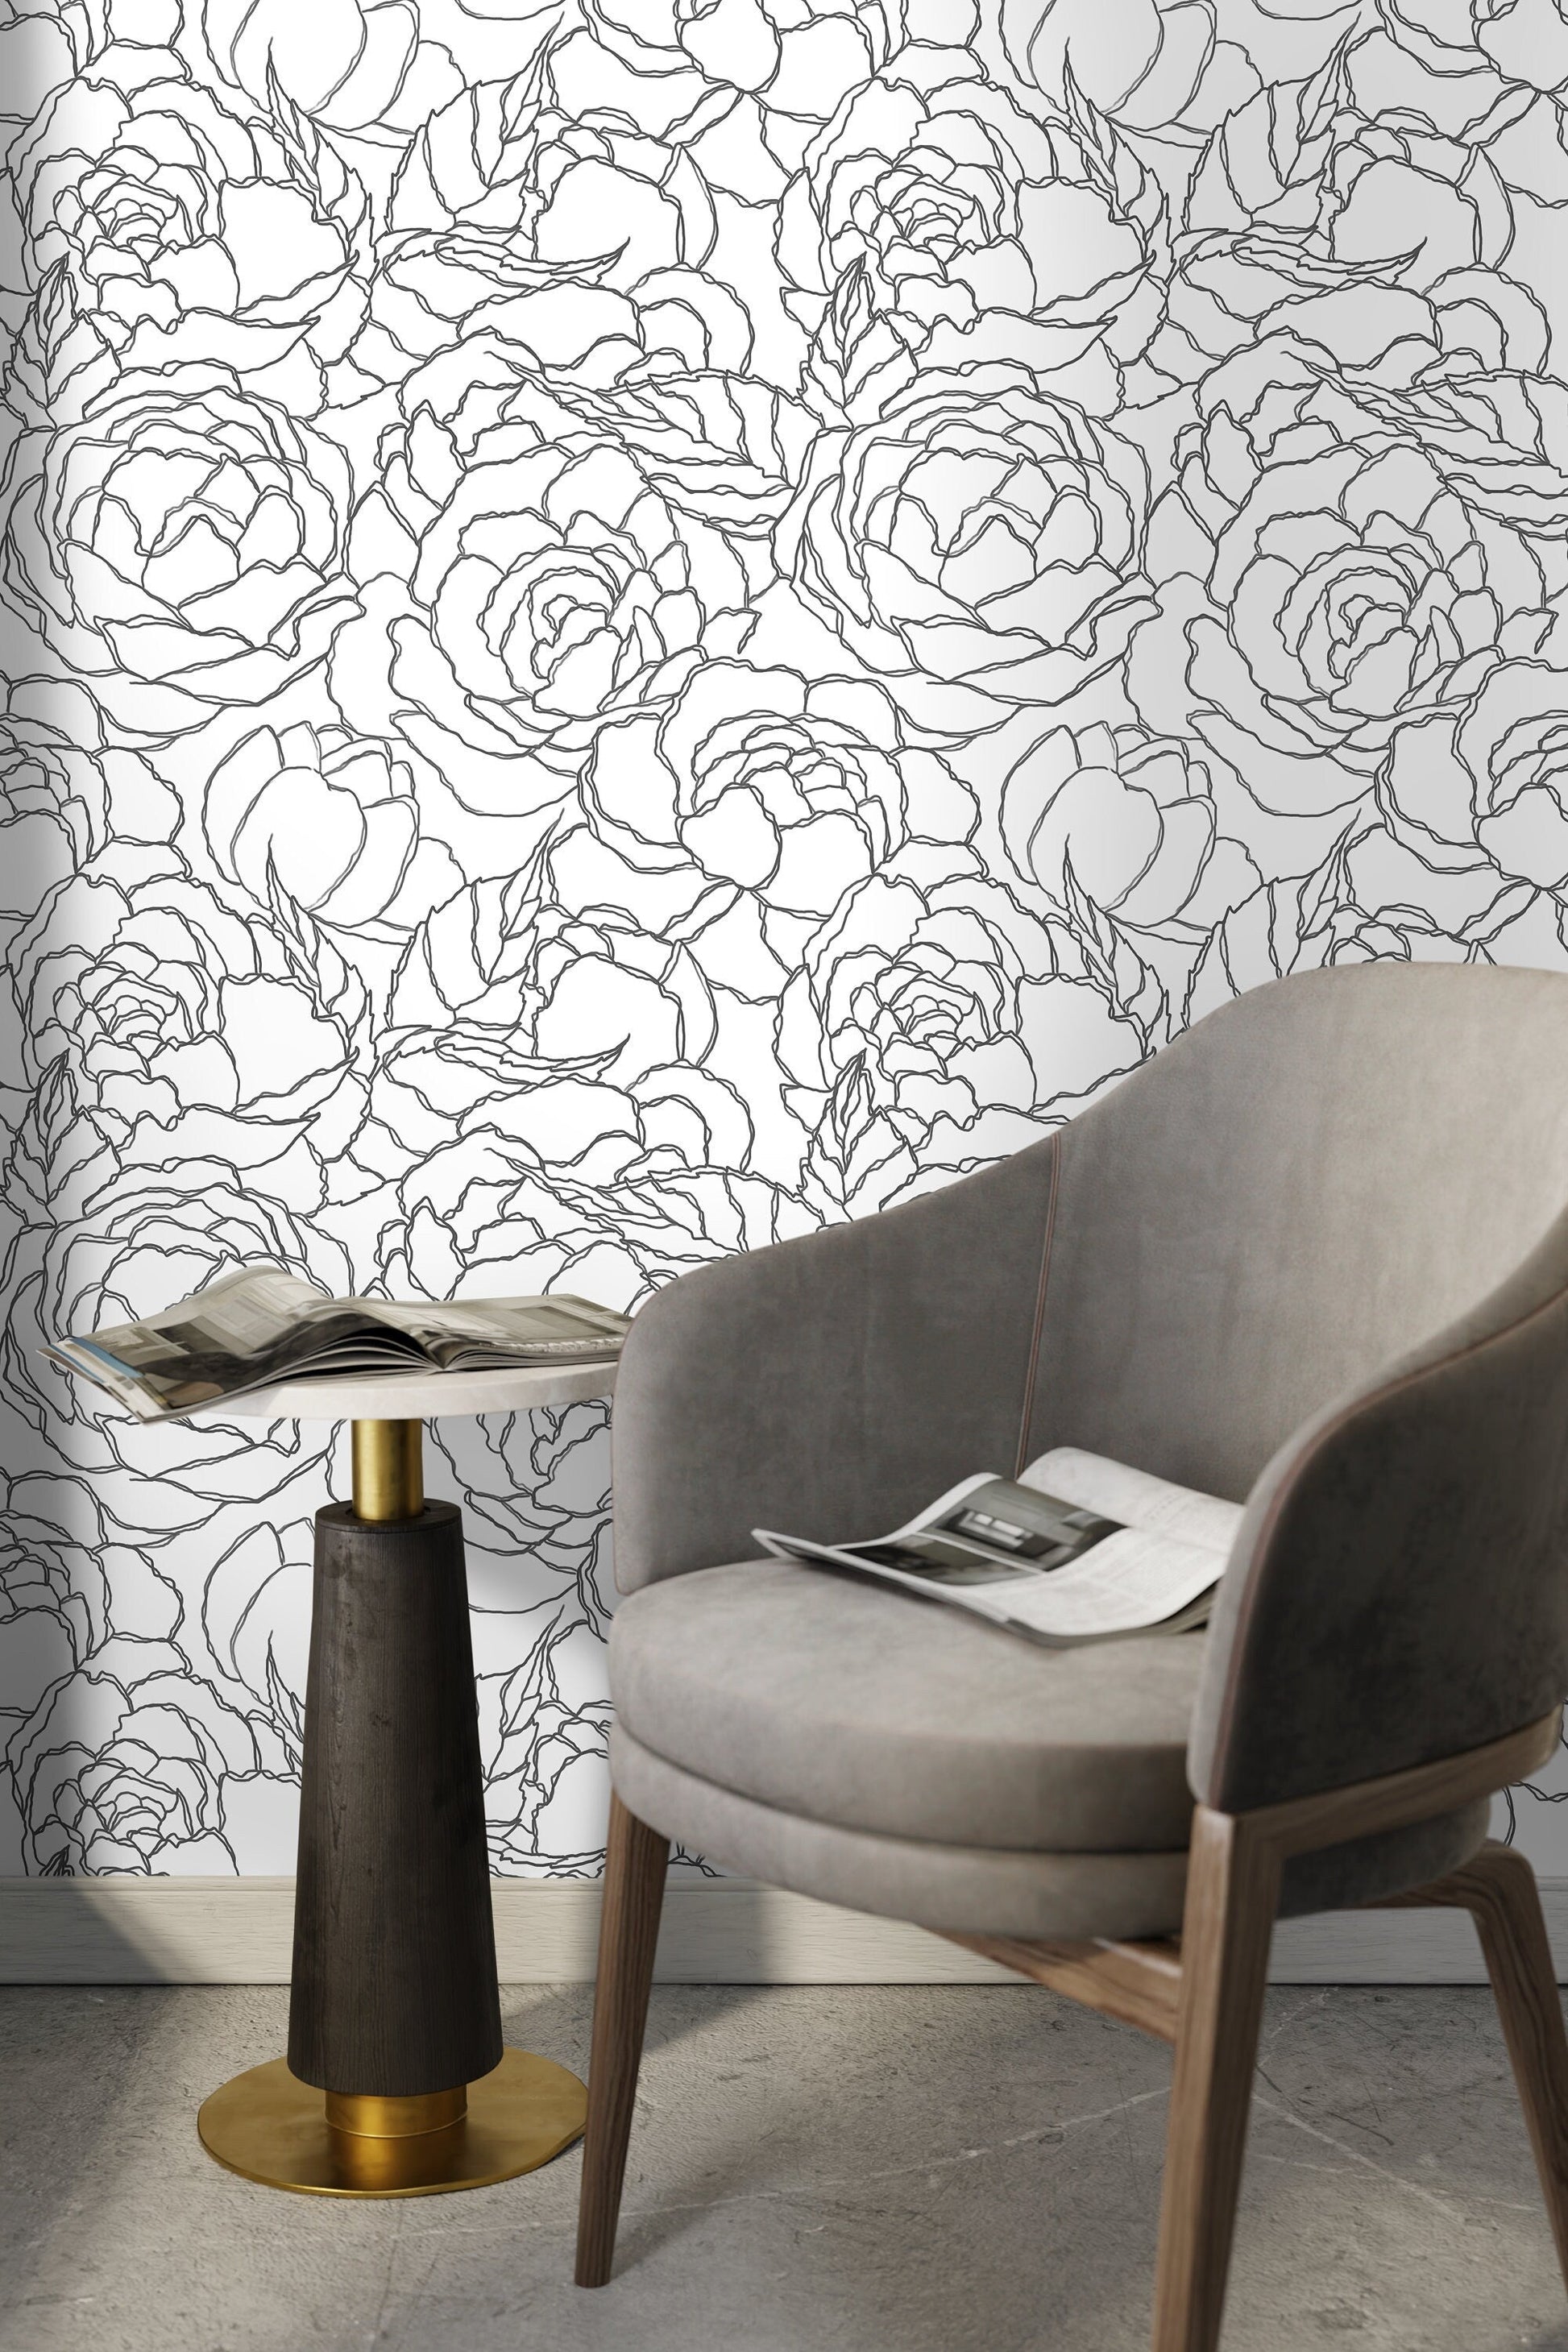 Grey and White Floral Background